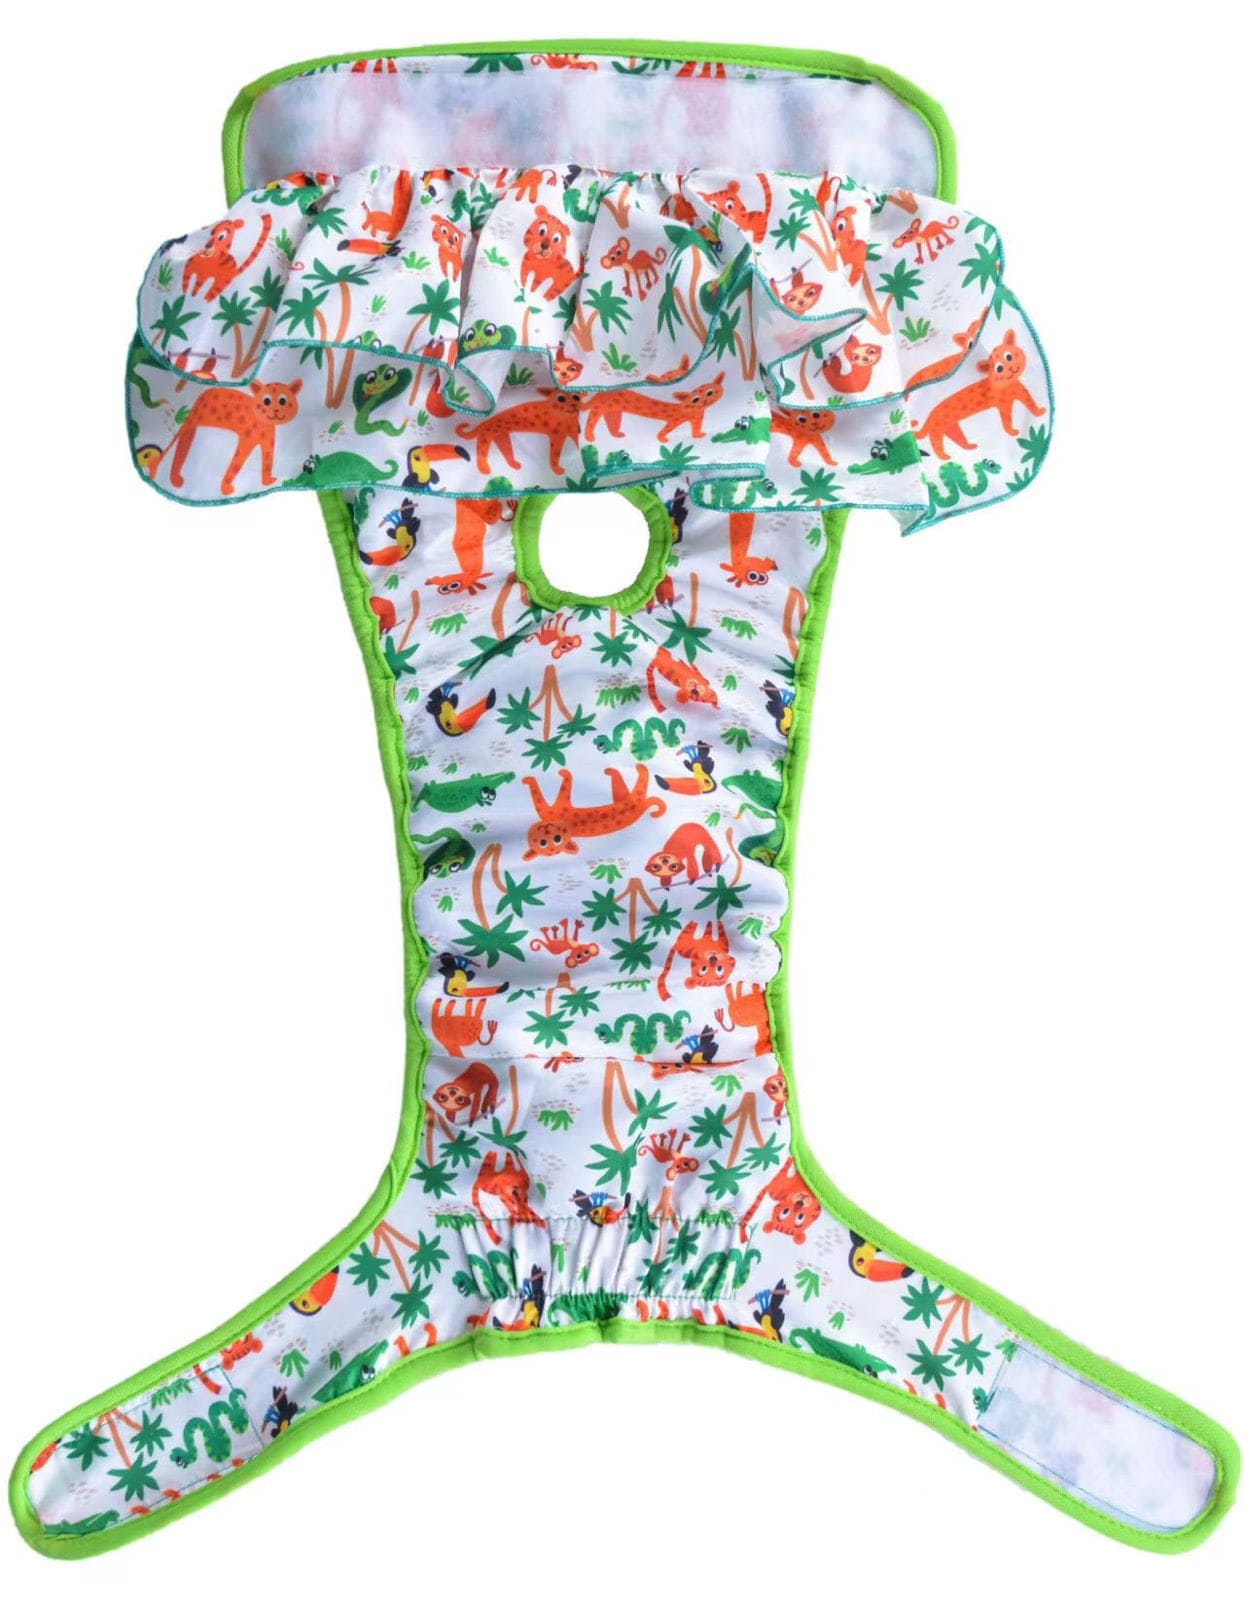 KUTKUT Female Dog Adjustable Diapers Washable Reusable Super Absorbency Leak-Proof Jungle Pattern Dog Nappie for Dogs in Heat, Period or Excitable Urination, Sanitary Panties (Green) - kutkut